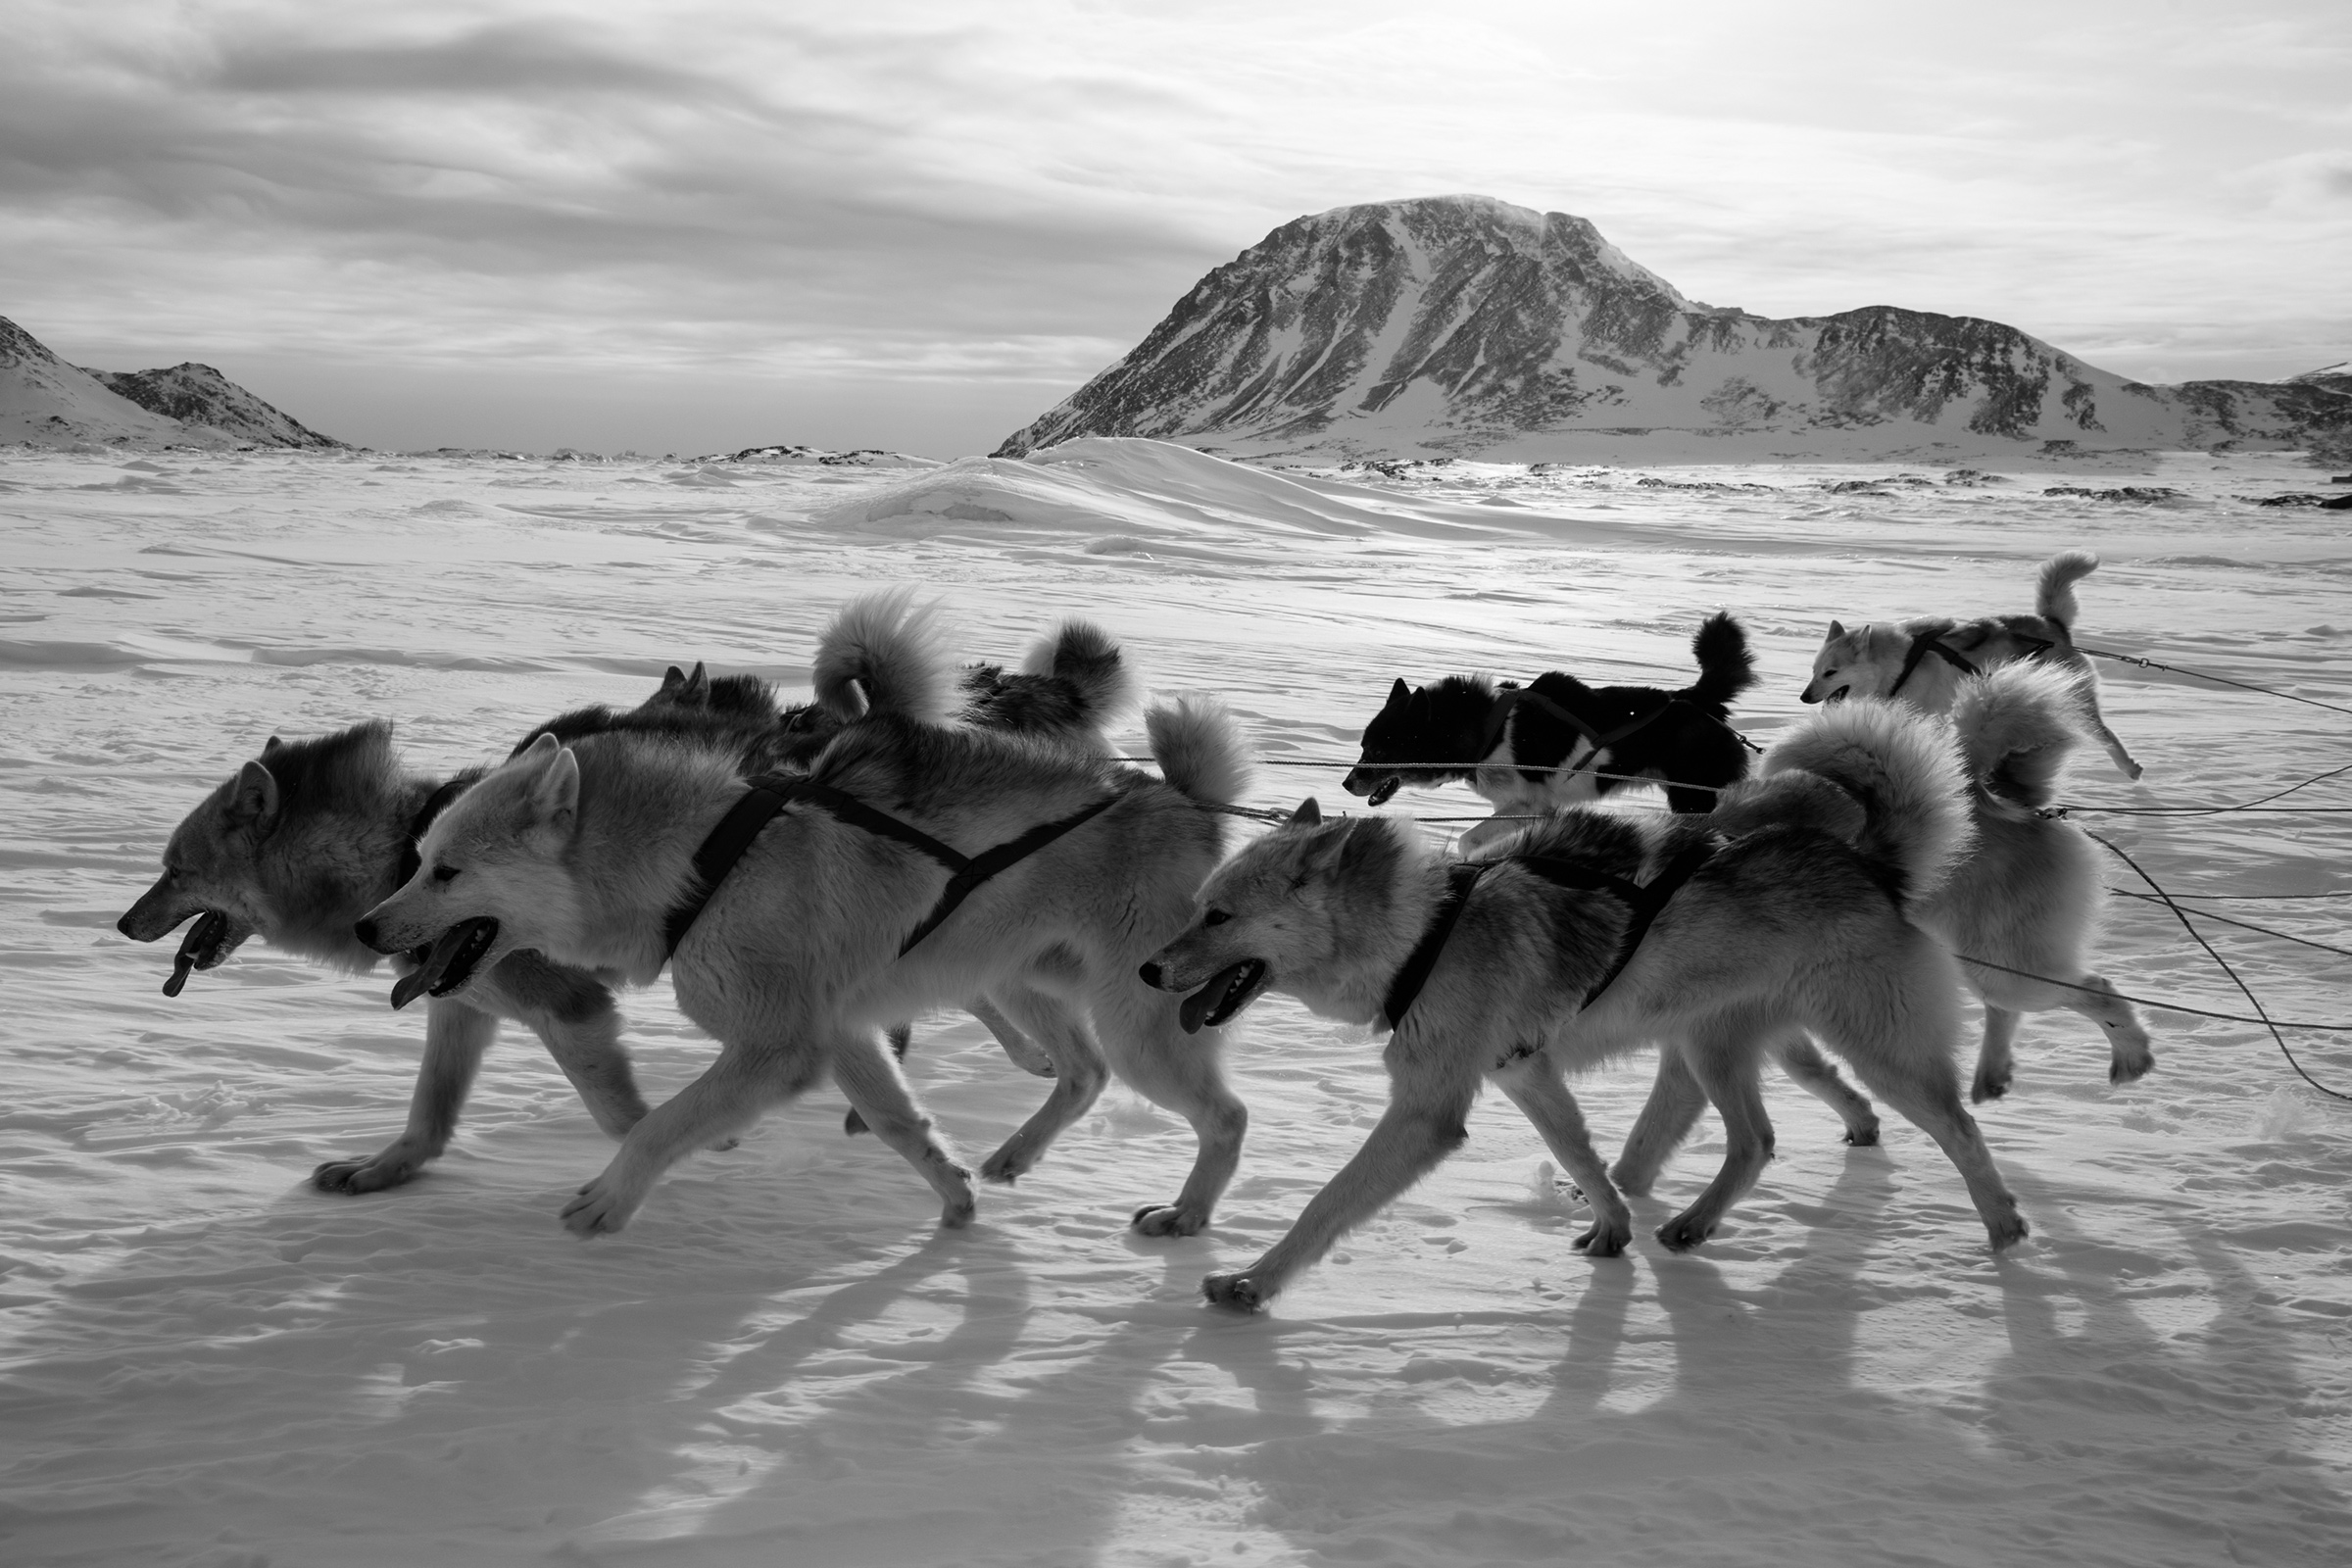 Greenlandic huskies hauling a dogsled up the east coast of Greenland in March 2020.